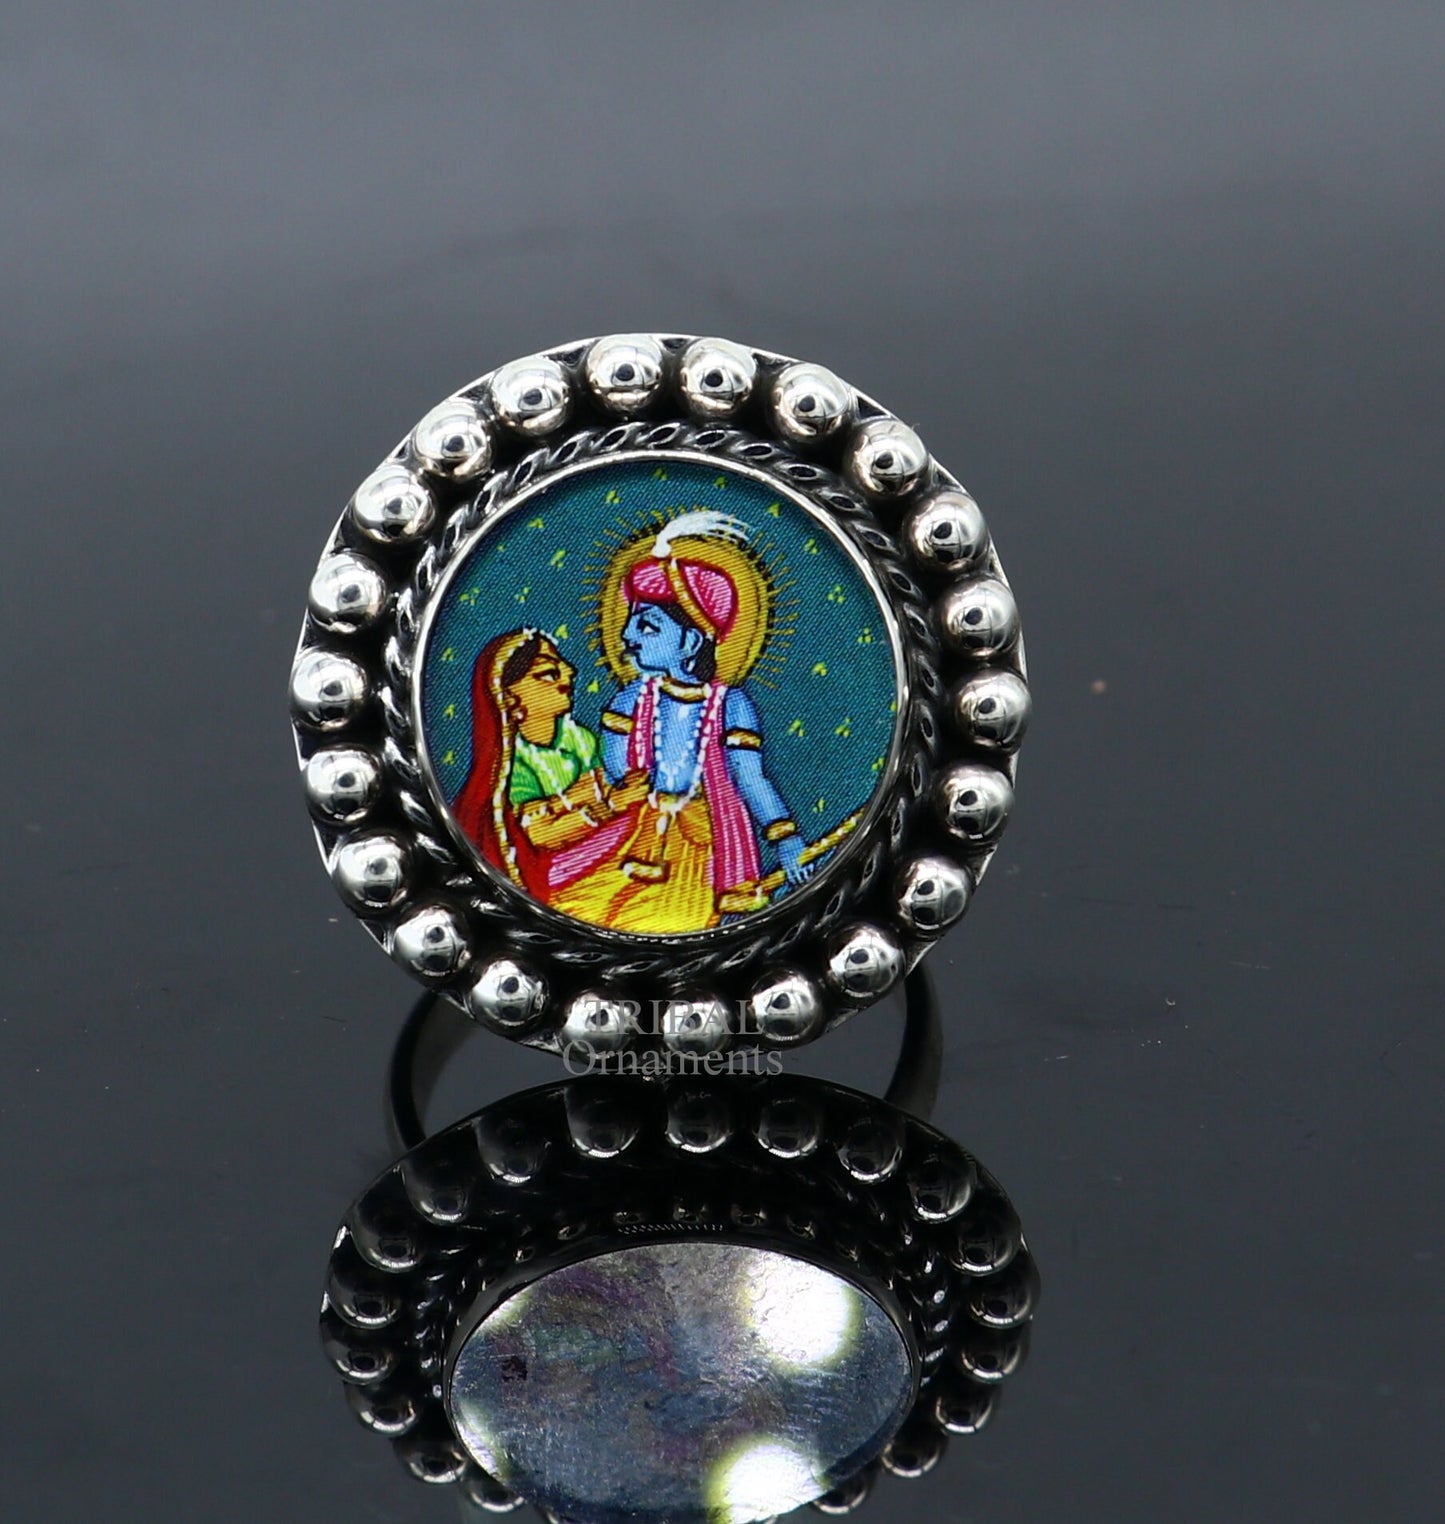 925 sterling silver adjustable ring band fabulous lord Krishna with Radha miniature art painting ring Stylish ethnic party jewelry RRing527 - TRIBAL ORNAMENTS